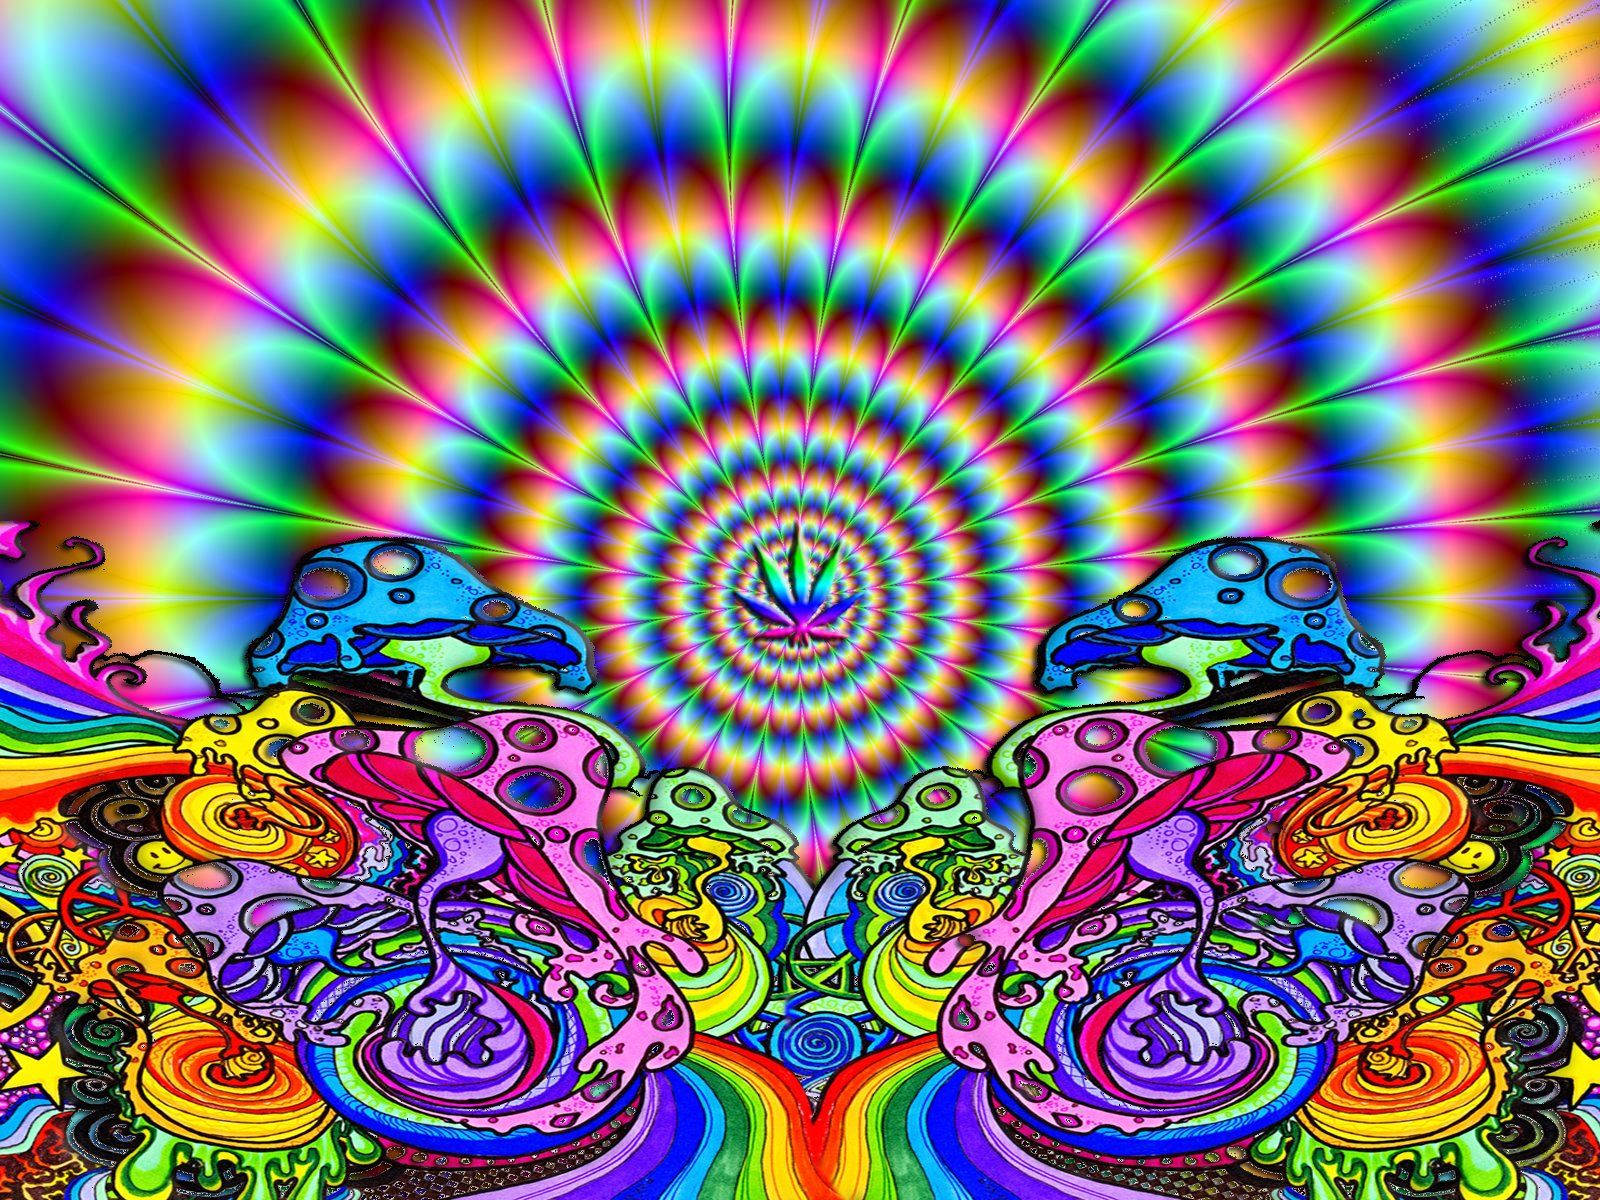 Psychedelic Weed Image Background